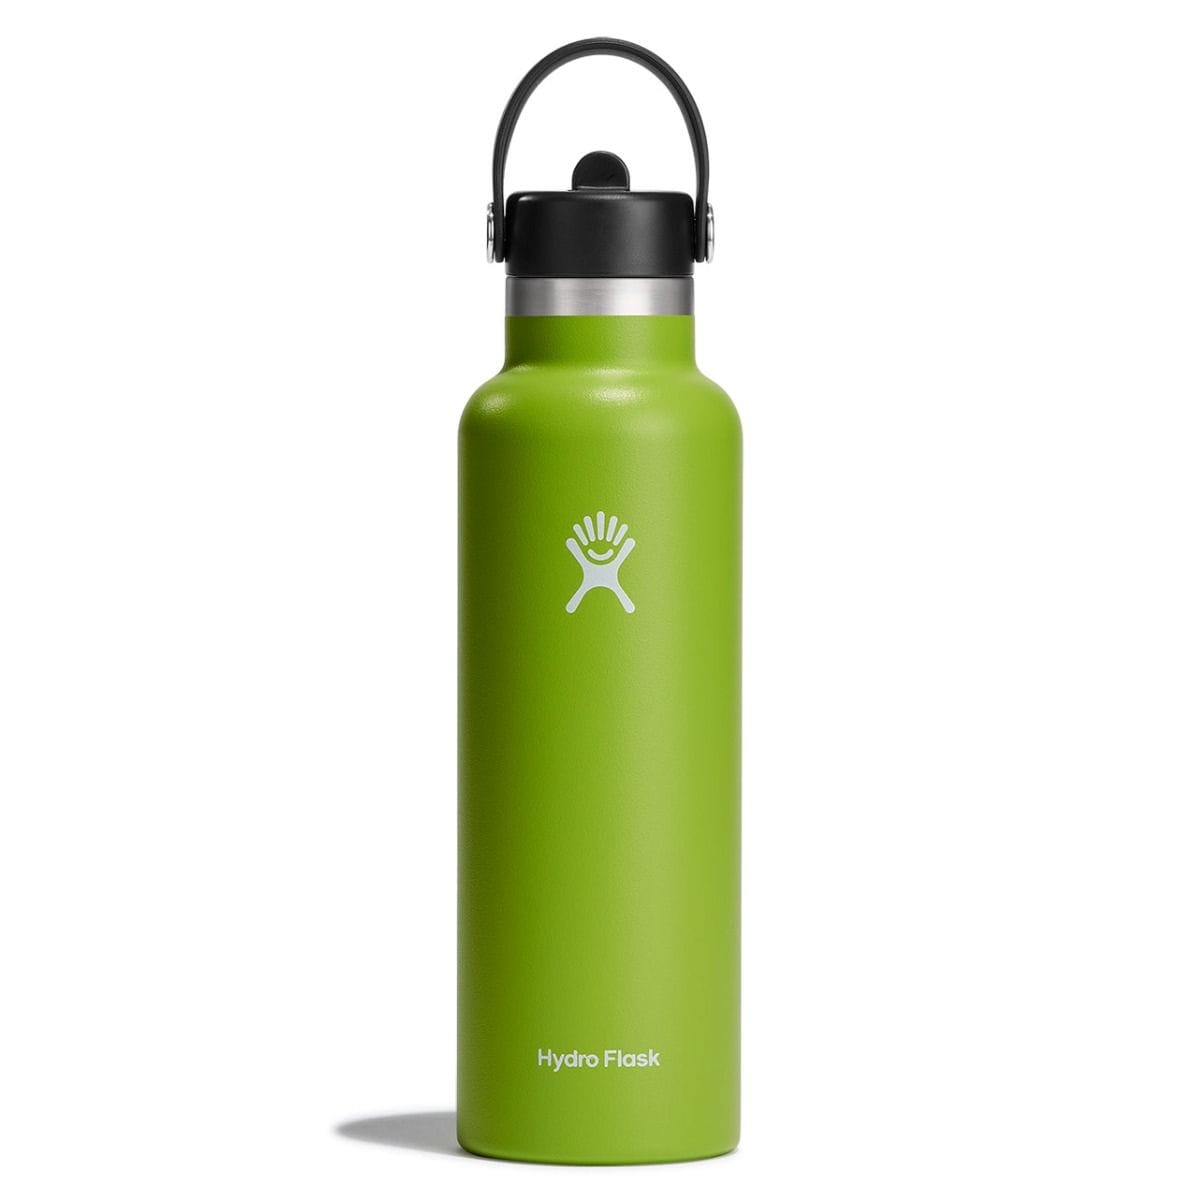 Hydro Flask Bottles & Flasks Seagrass Hydro Flask Standard Mouth with Flex Straw Cap